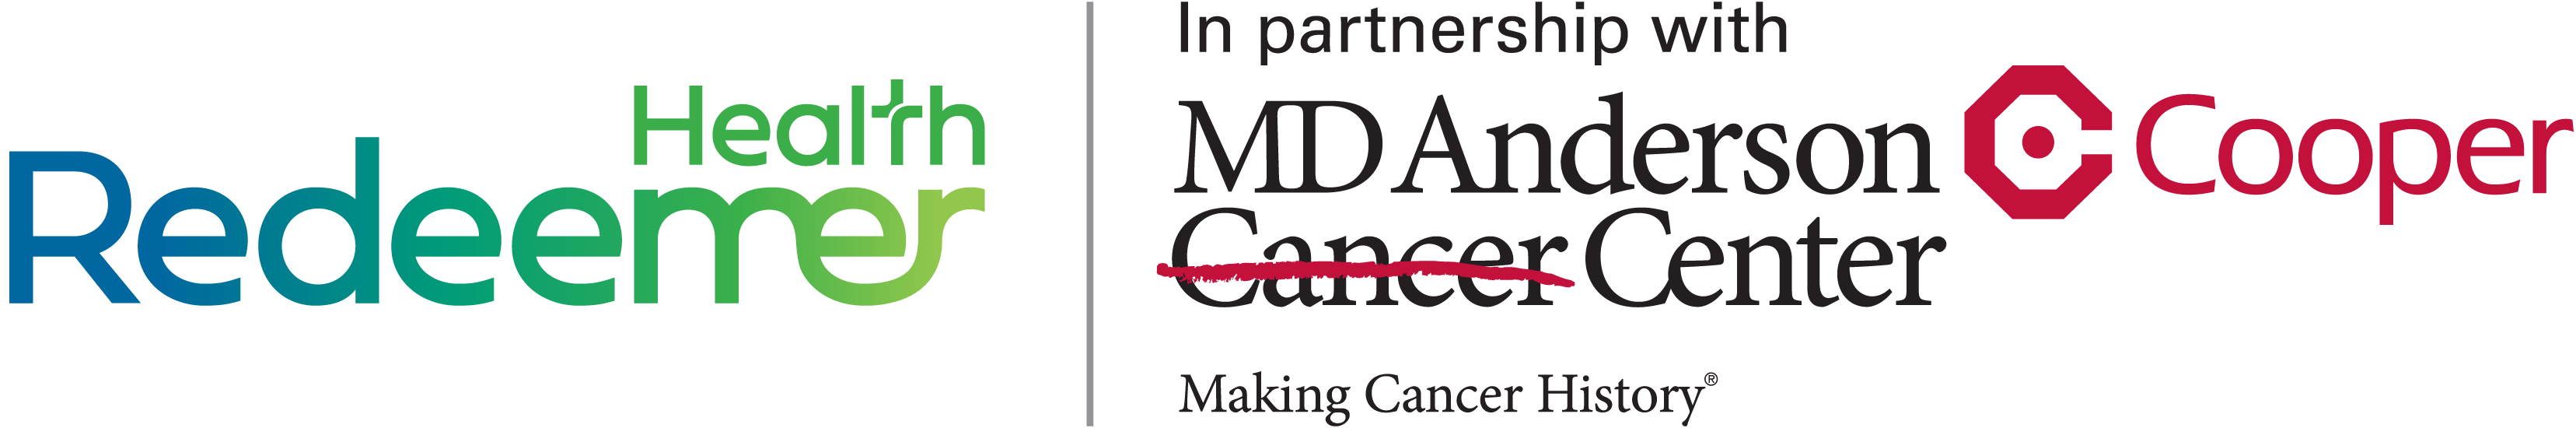 Redeemer Health in partnership with MD Anderson Cancer Center at Cooper 